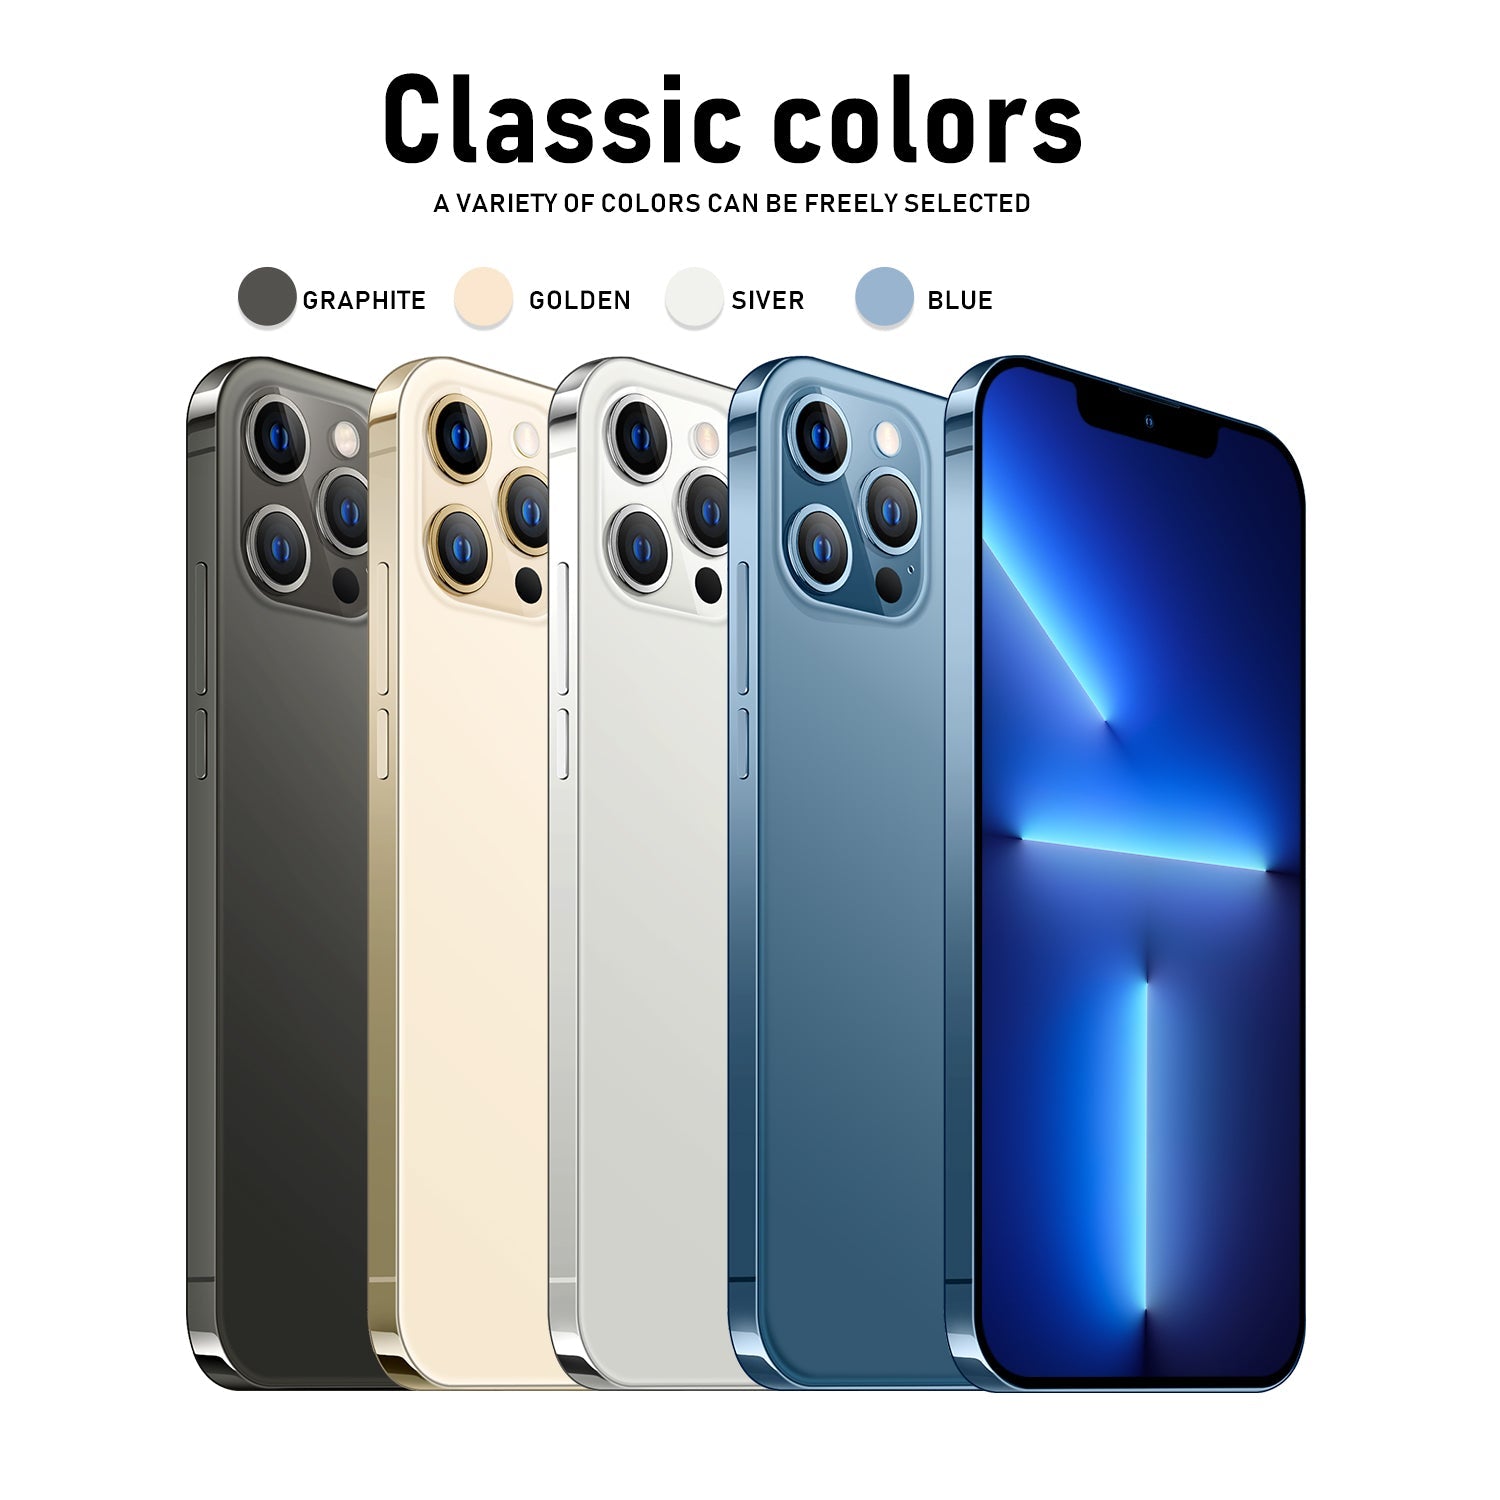 Original Global I13 PRO MAX PHONE 12GB+512GB 6.7 Inch full Display Android 10.0 Mobile Phone 13 PRO MAX Cell Phone Smartphone baby magazin 